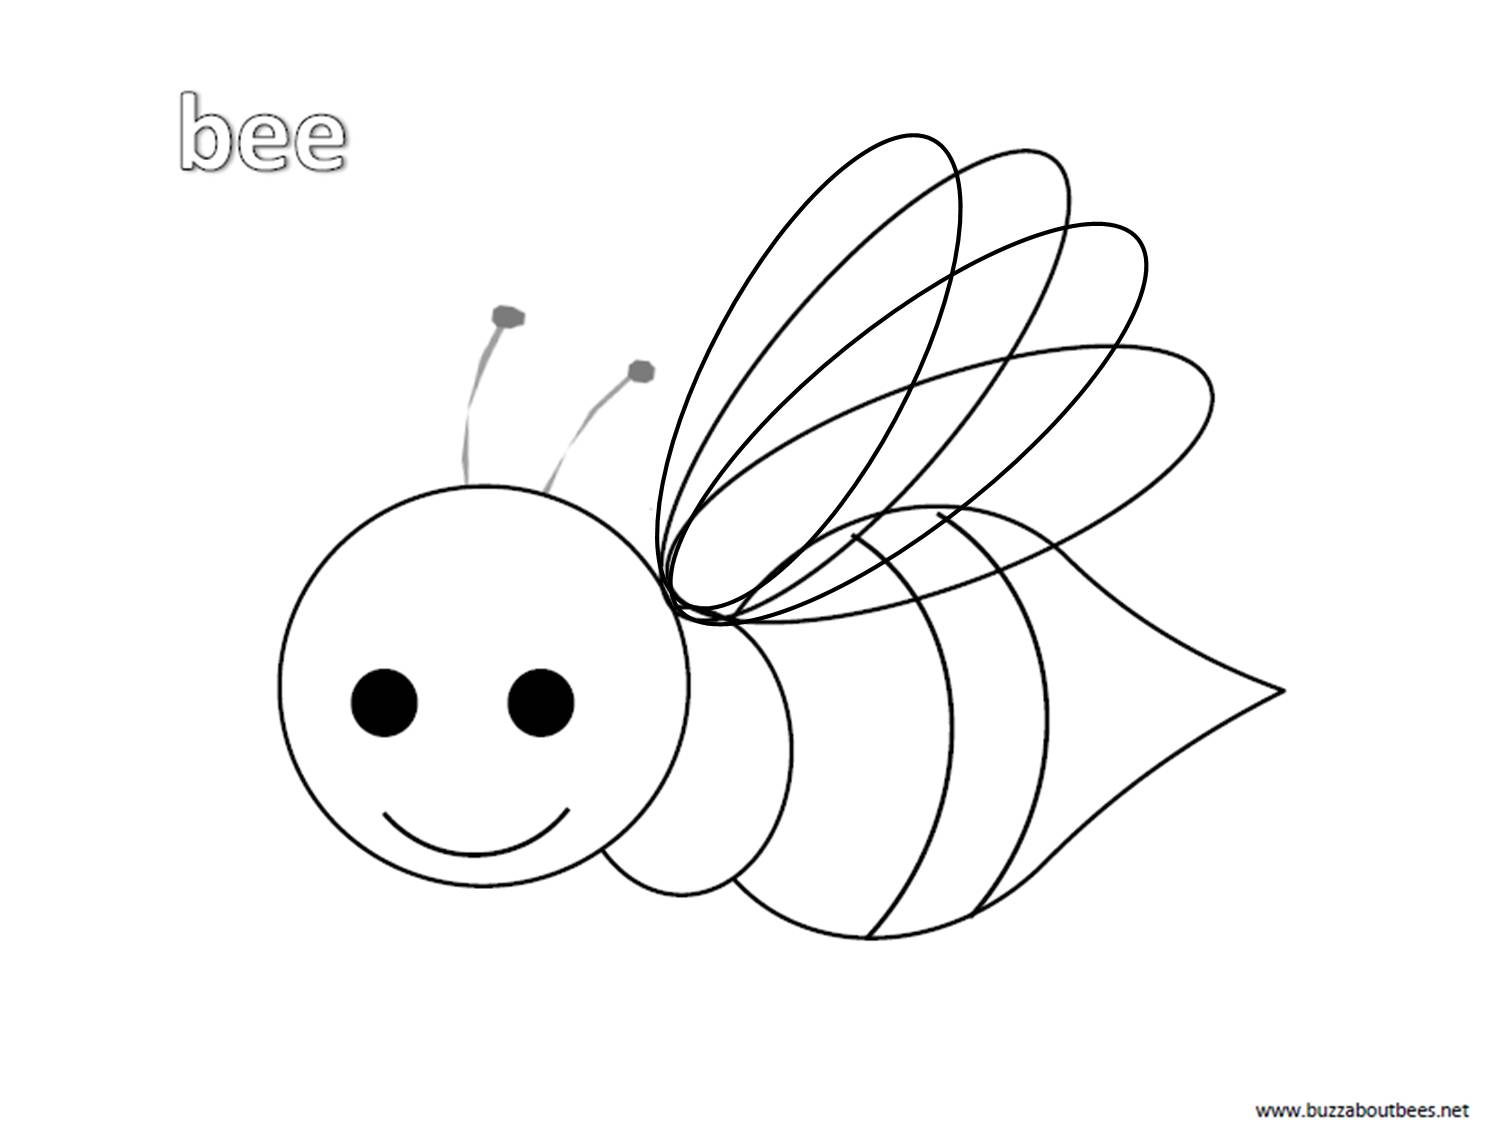 Bee Coloring Pages Educational Activity Sheets And Puzzles